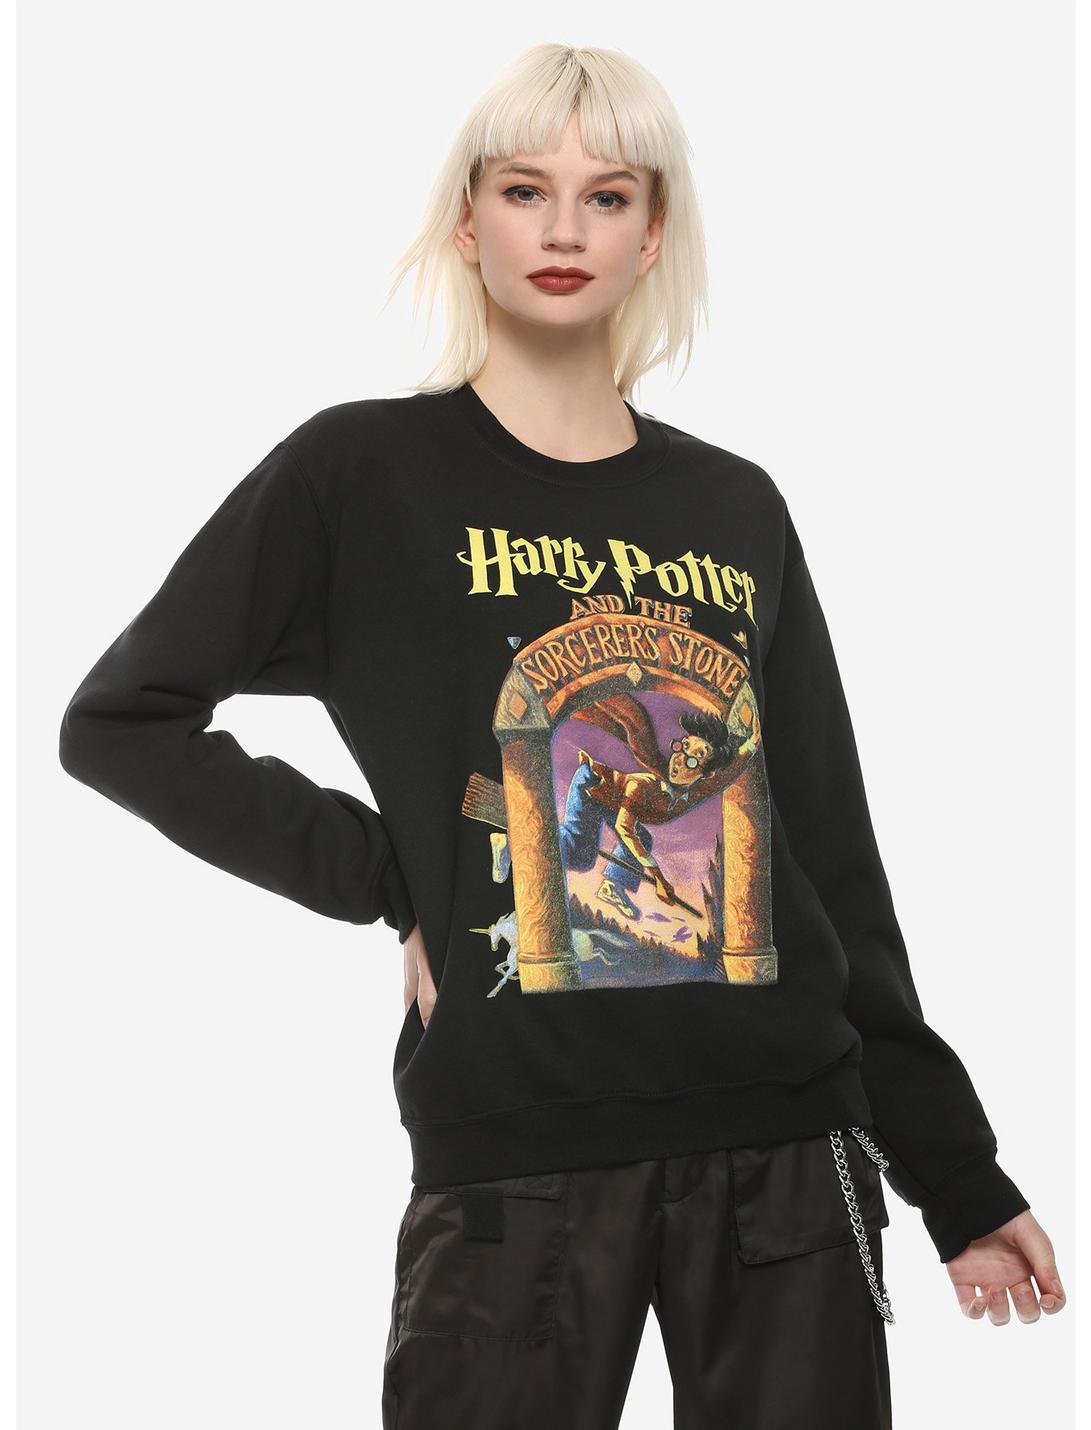 Harry Potter And The Sorcerer's Stone Book Cover Girls Sweatshirt, MULTI, hi-res